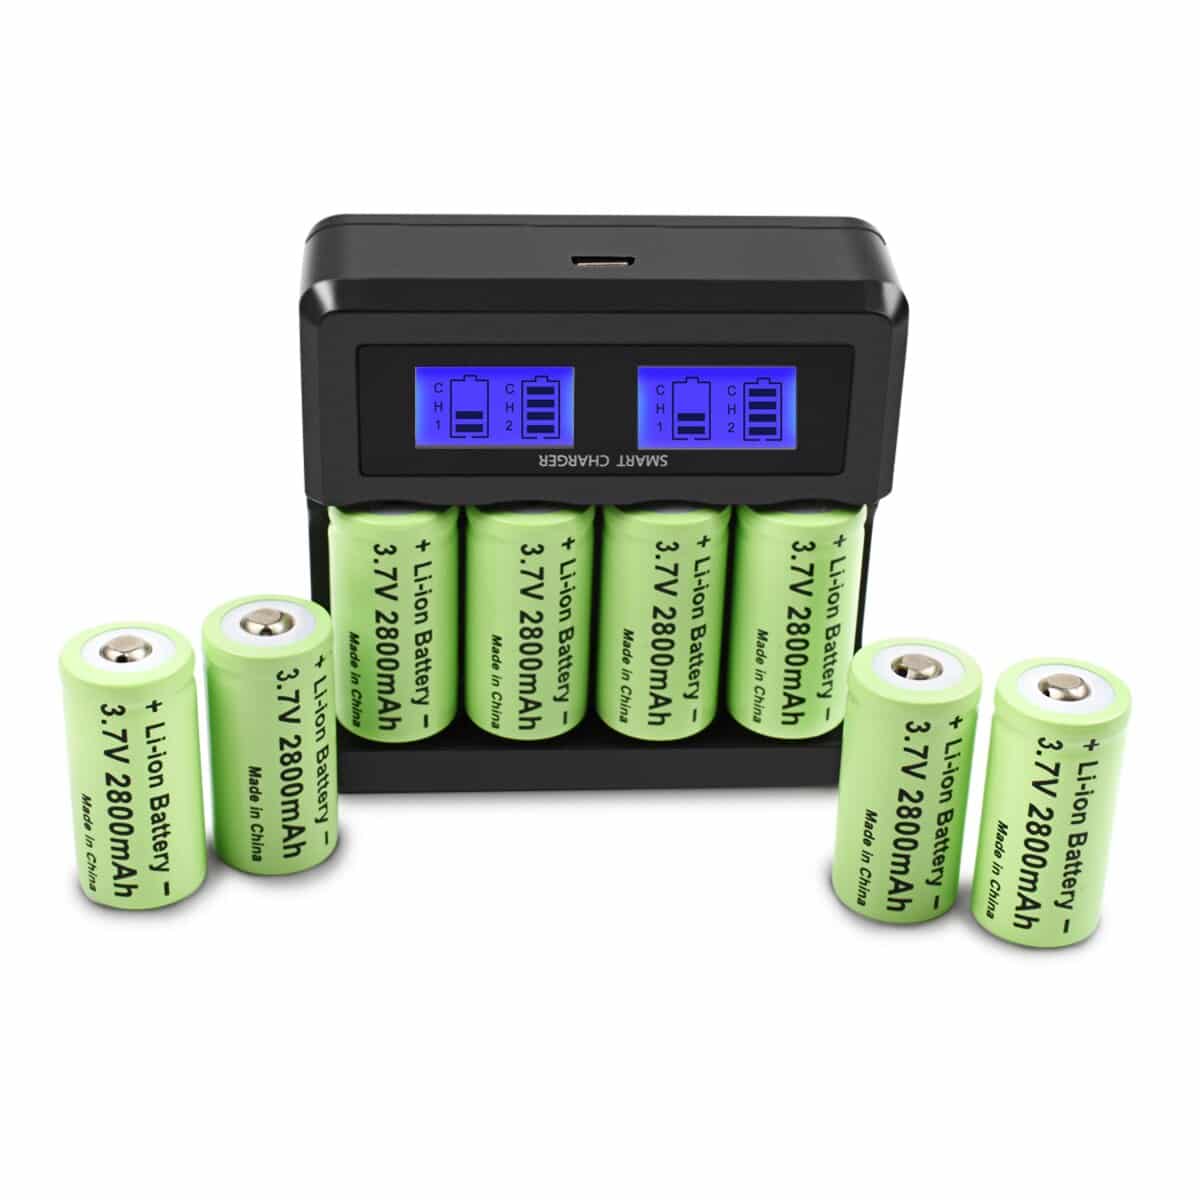 8xbattery-4charger